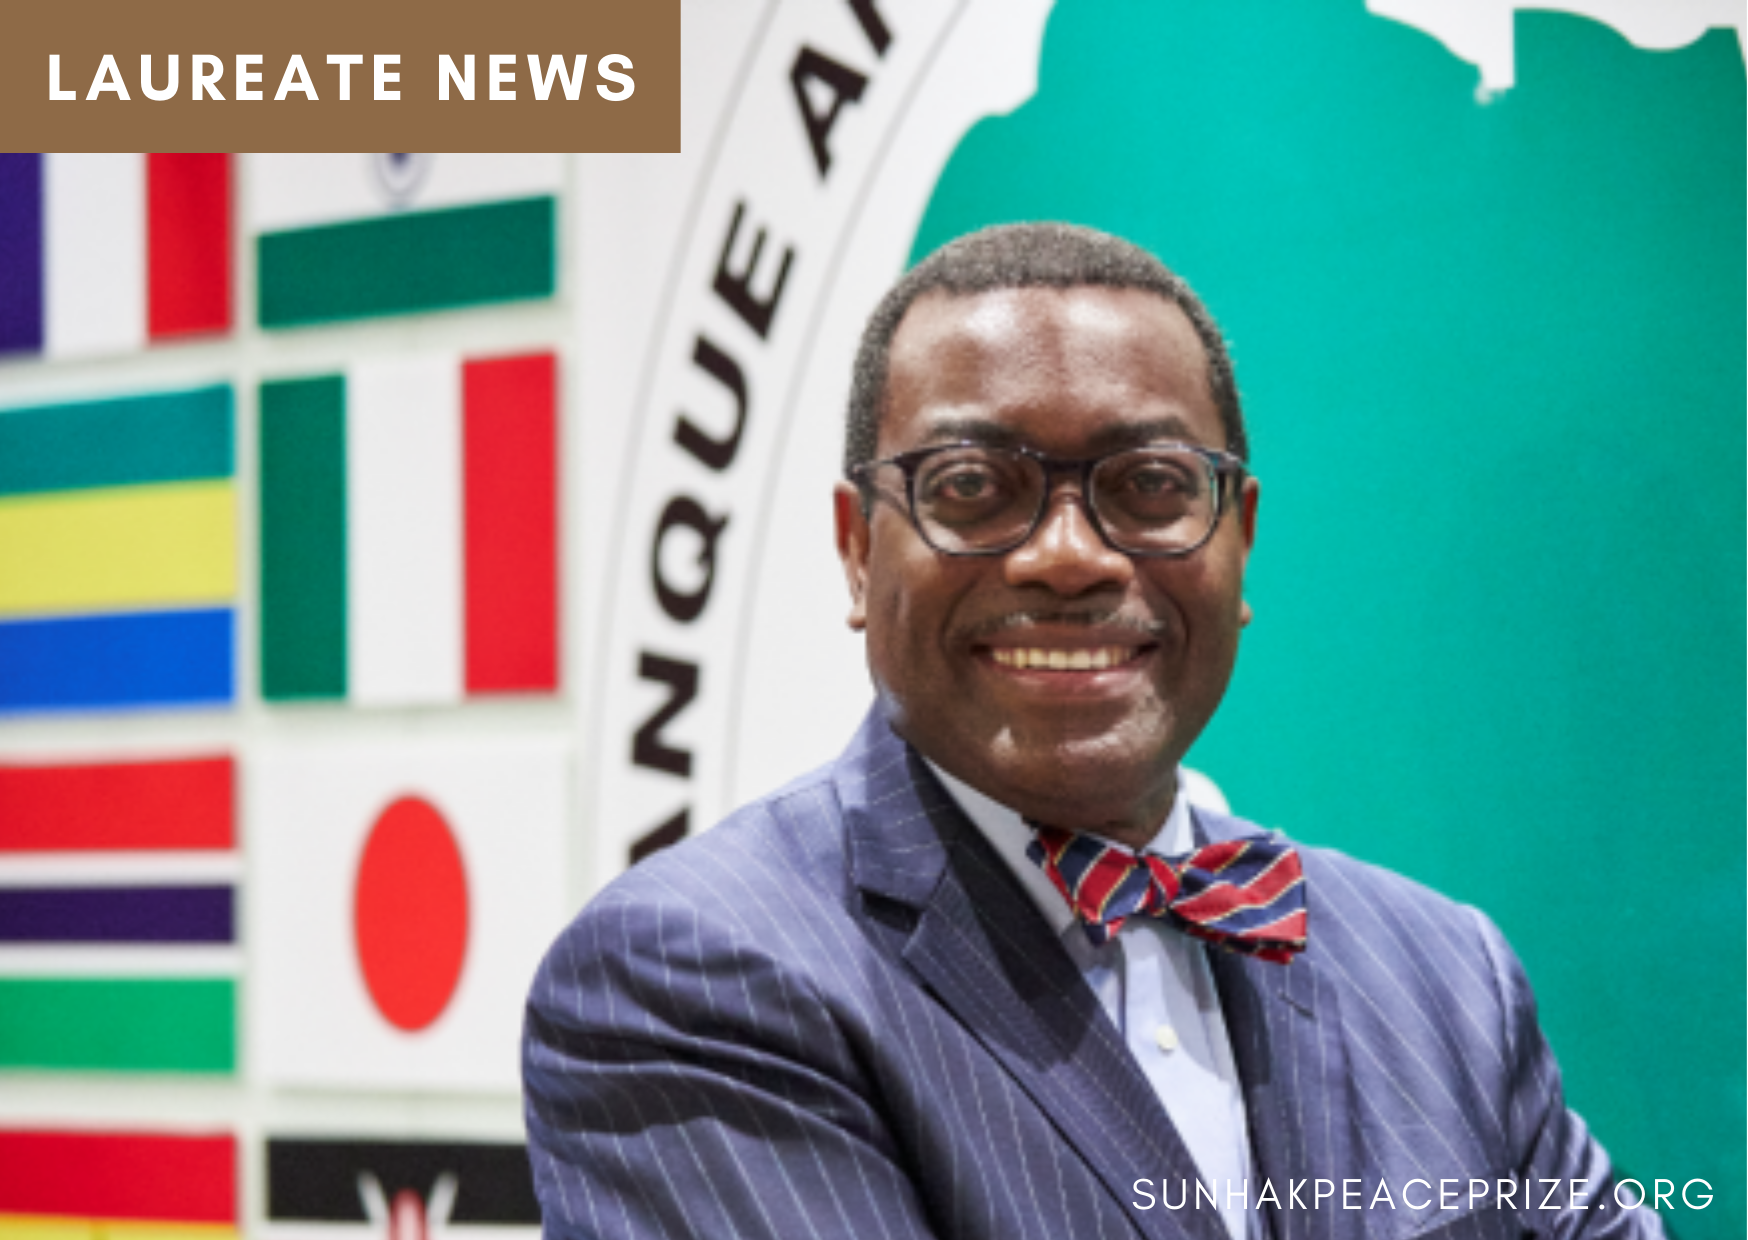 Dr. Akinwumi Adesina, Donates Cash Prizes of$500,000 to the World Fighters Foundation 썸네일